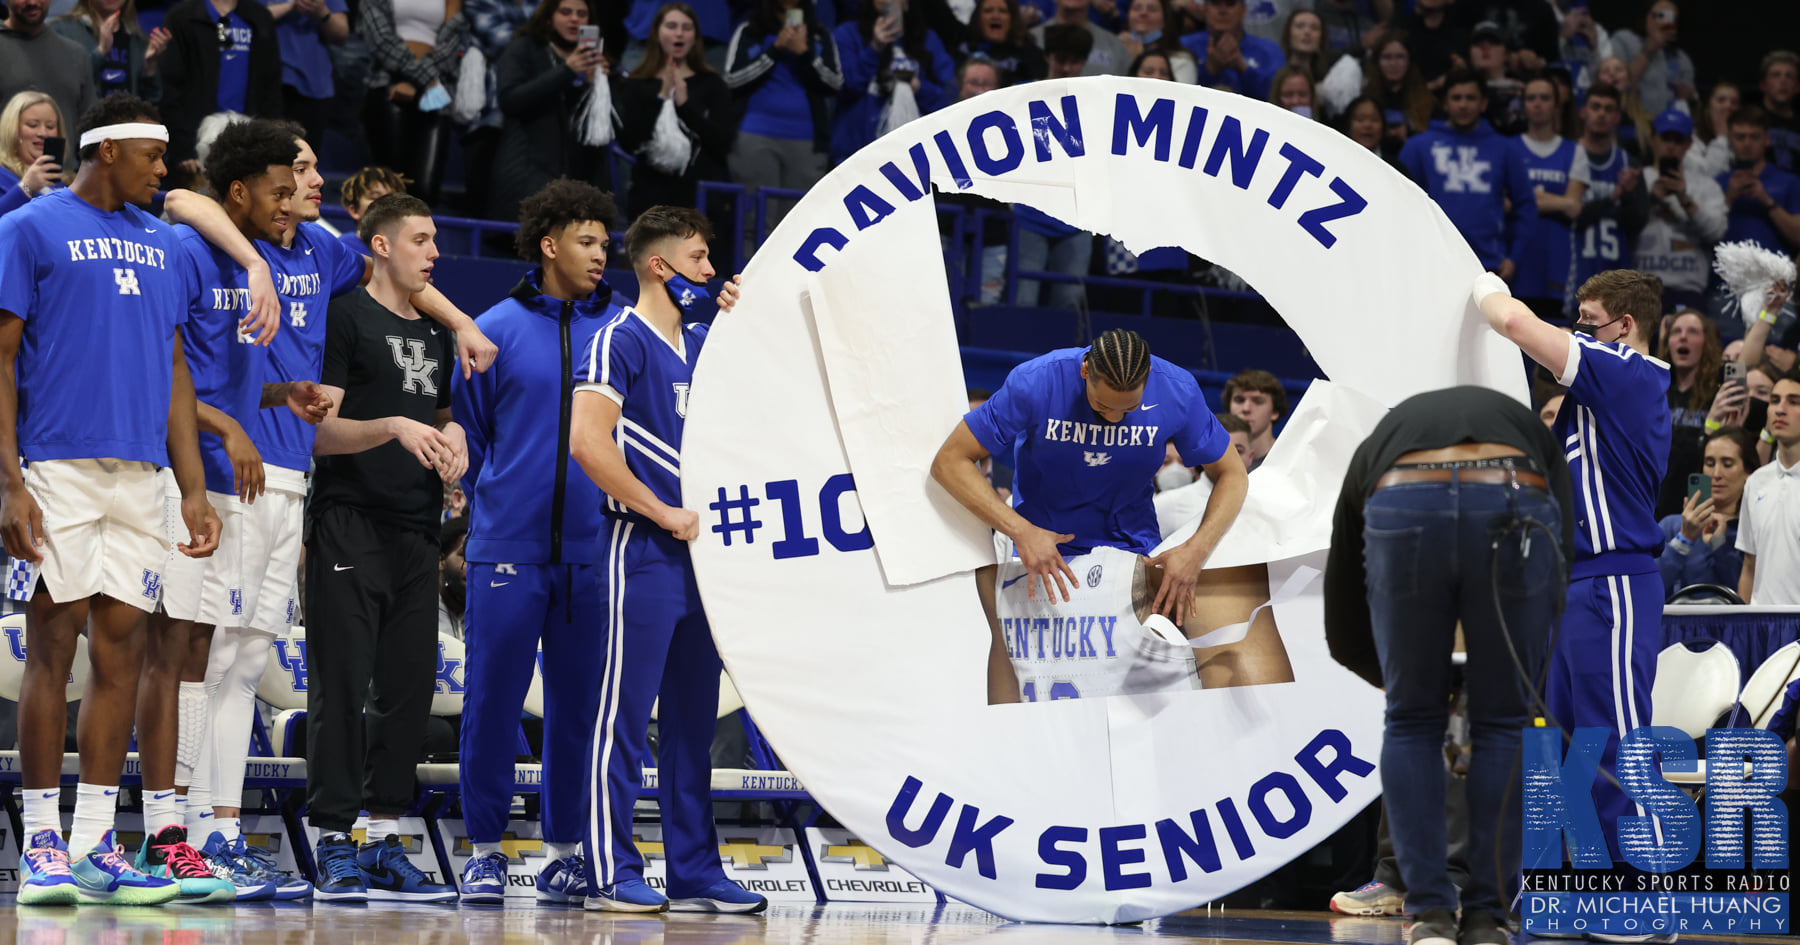 "A bunch" of Kentucky Wildcats prepare for Senior Day On3